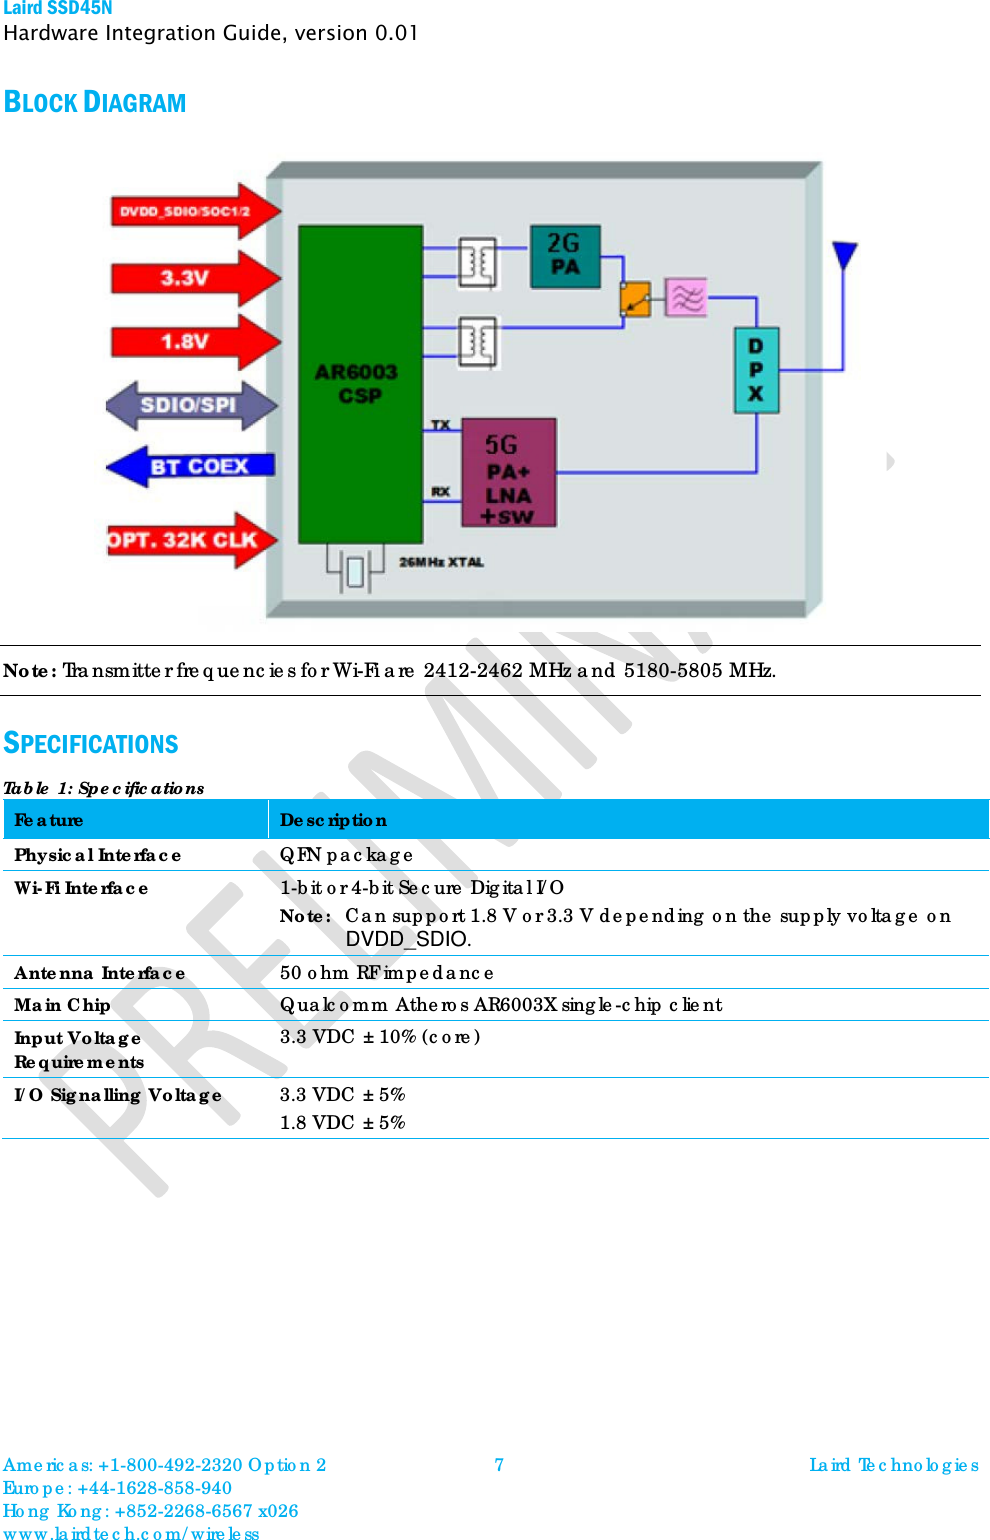 Laird SSD45N Hardware Integration Guide, version 0.01 BLOCK DIAGRAM    Note: Transmitter frequencies for Wi-Fi are 2412-2462 MHz and 5180-5805 MHz.  SPECIFICATIONS Table 1: Specifications Feature Description Physical Interface QFN package Wi-Fi Interface 1-bit or 4-bit Secure Digital I/O  Note:  Can support 1.8 V or 3.3 V depending on the supply voltage on DVDD_SDIO. Antenna Interface 50 ohm RF impedance  Main Chip Qualcomm Atheros AR6003X single-chip client  Input Voltage Requirements 3.3 VDC ± 10% (core) I/O Signalling Voltage 3.3 VDC ± 5% 1.8 VDC ± 5%  Americas: +1-800-492-2320 Option 2 Europe: +44-1628-858-940 Hong Kong: +852-2268-6567 x026 www.lairdtech.com/wireless 7 Laird Technologies  